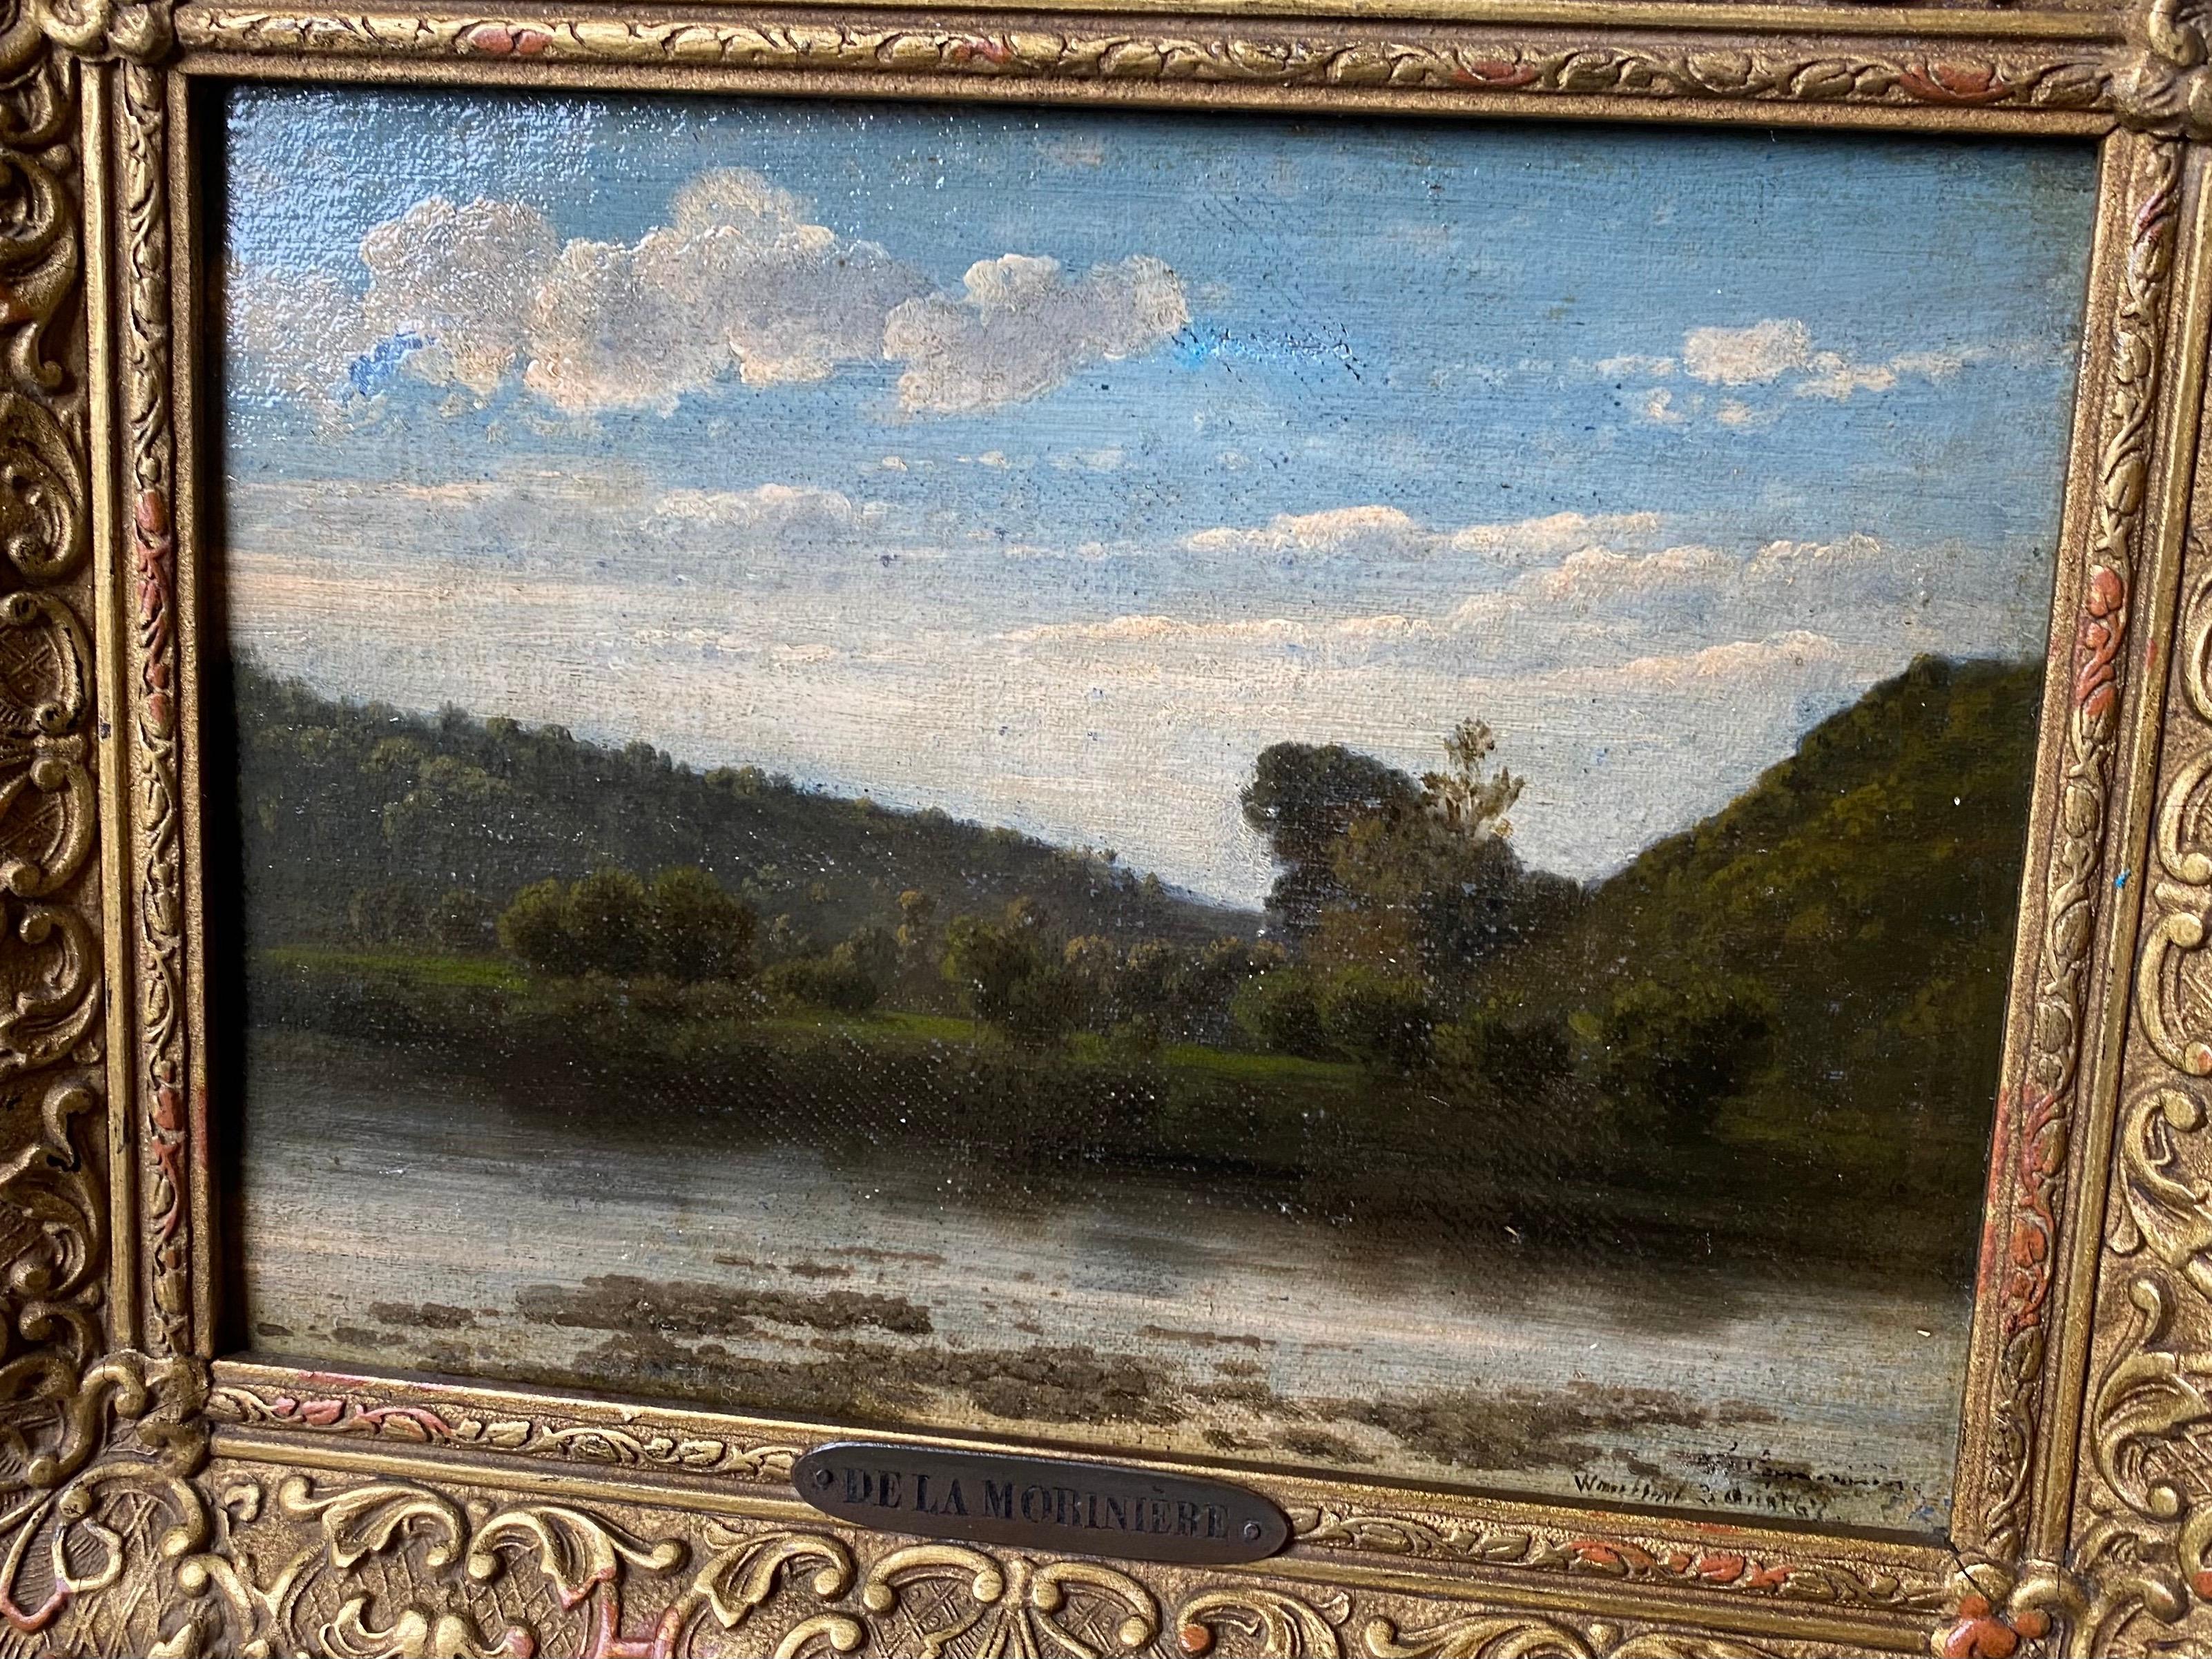 Petite French 19th century Impressionist painting of a river - barbizon school - Brown Landscape Painting by Unknown